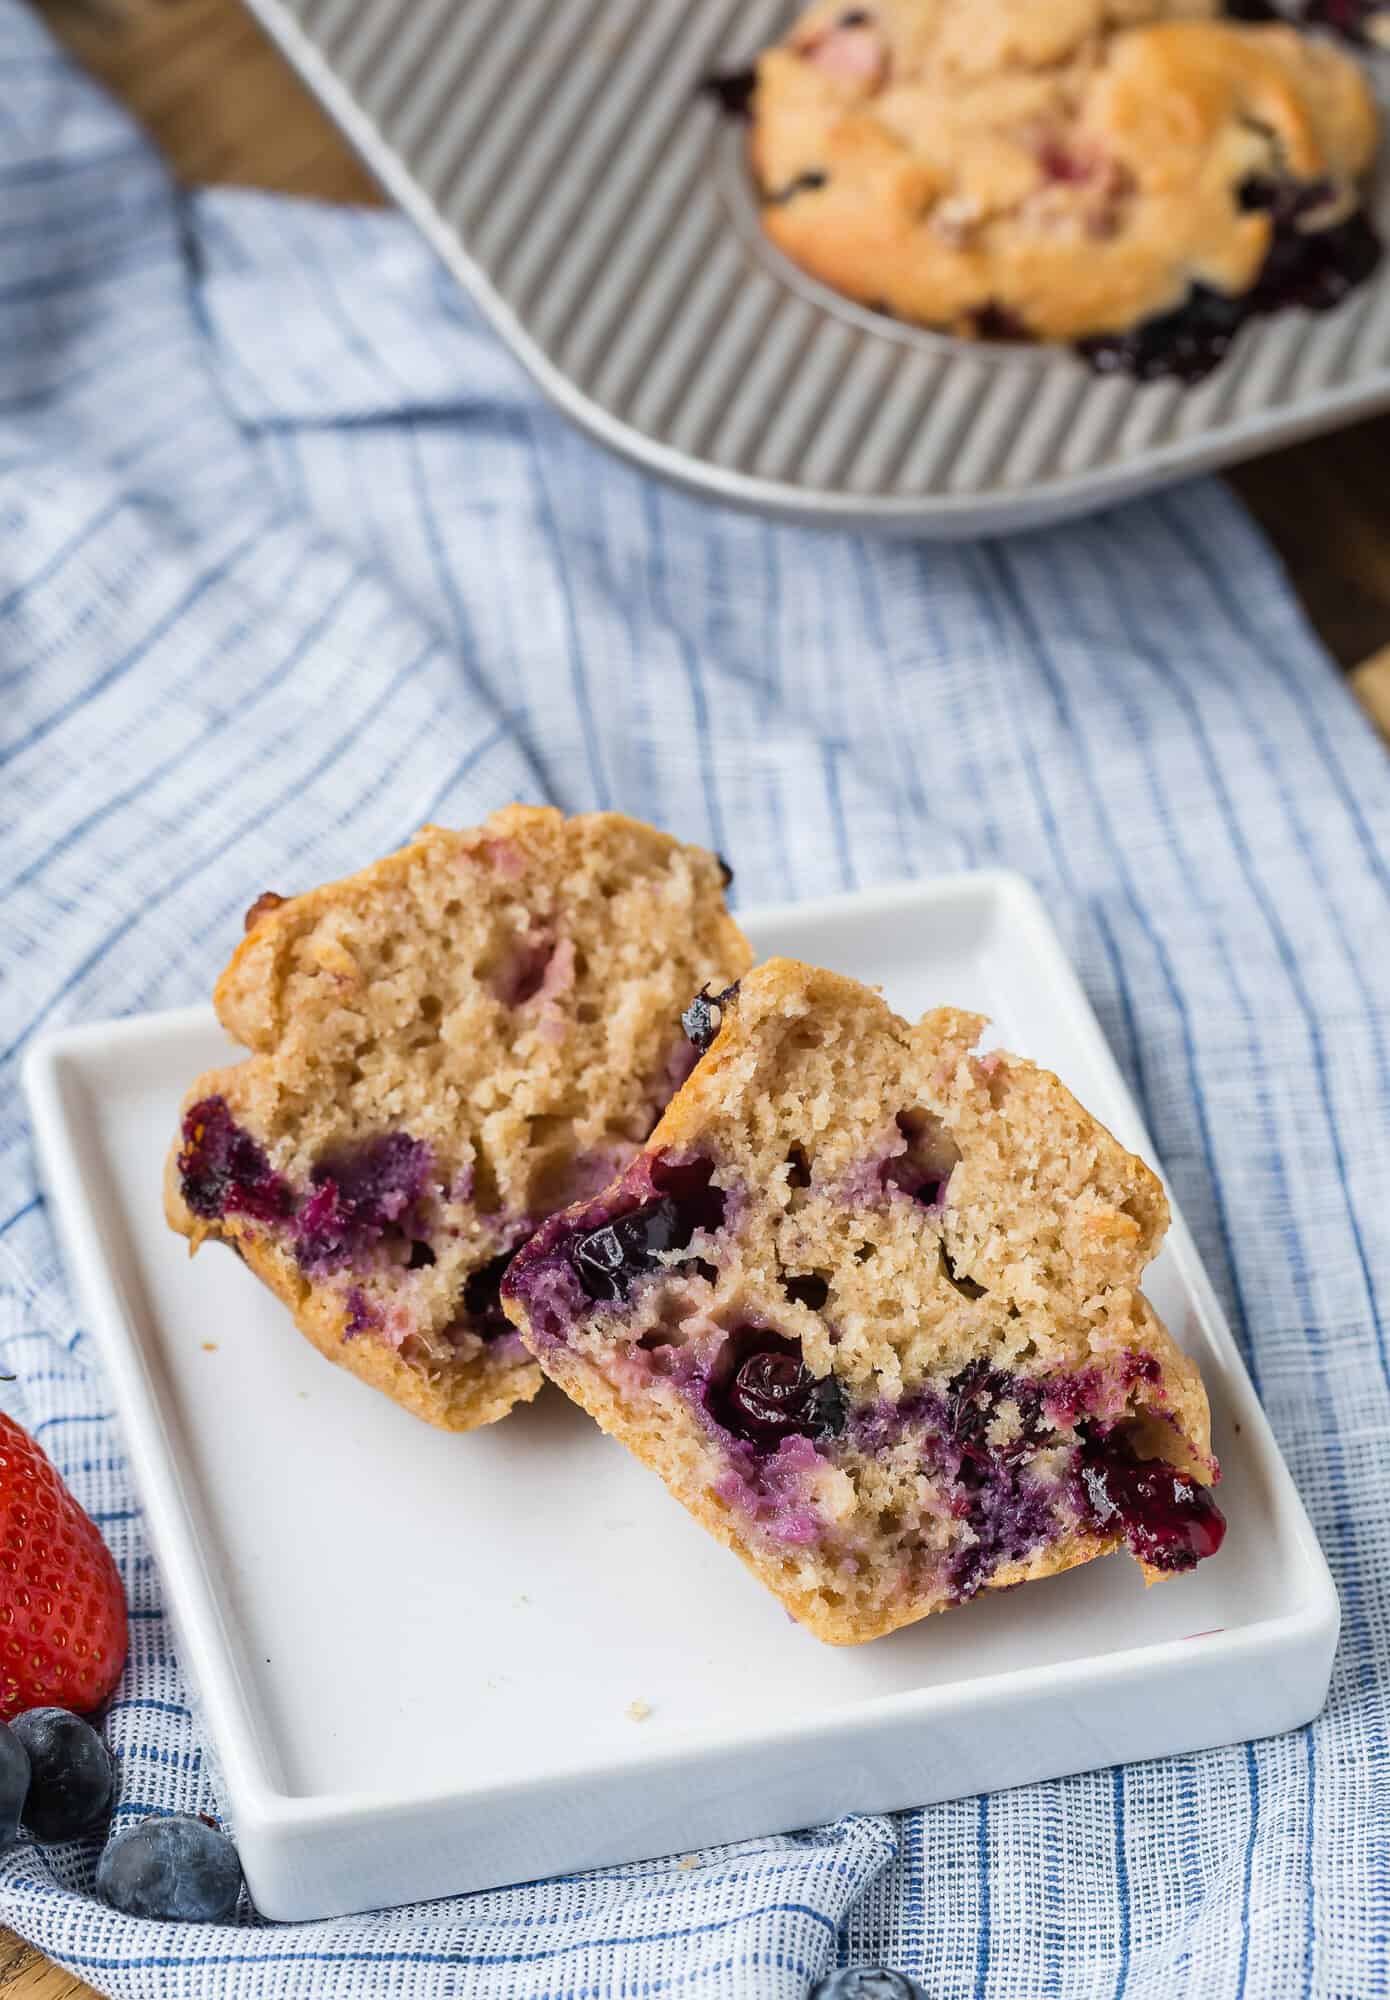 A muffin full of berries split open on a white plate to show the inside.